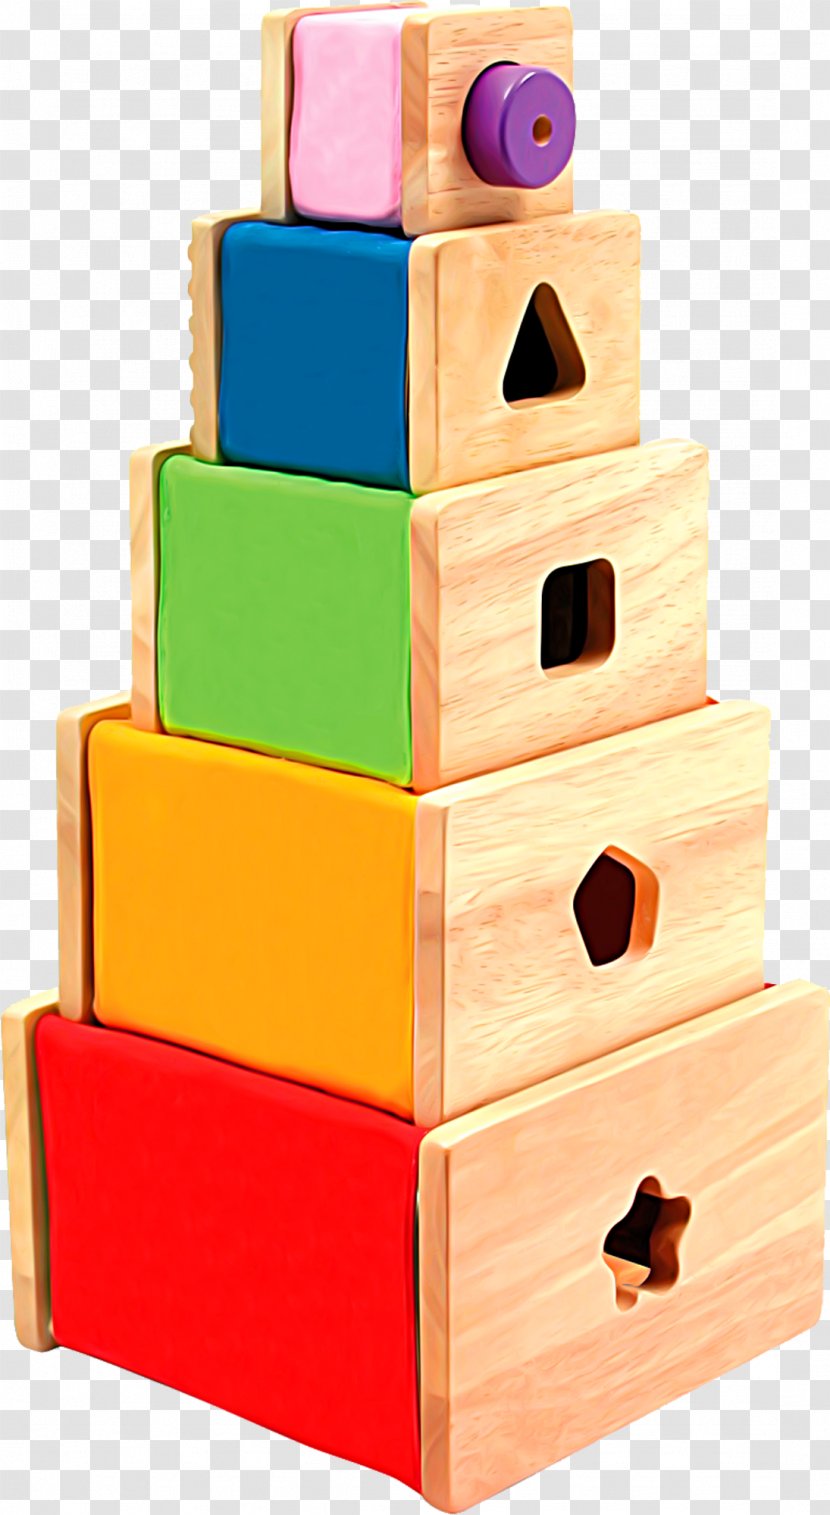 Box Toy Wood Clip Art - Photography Transparent PNG